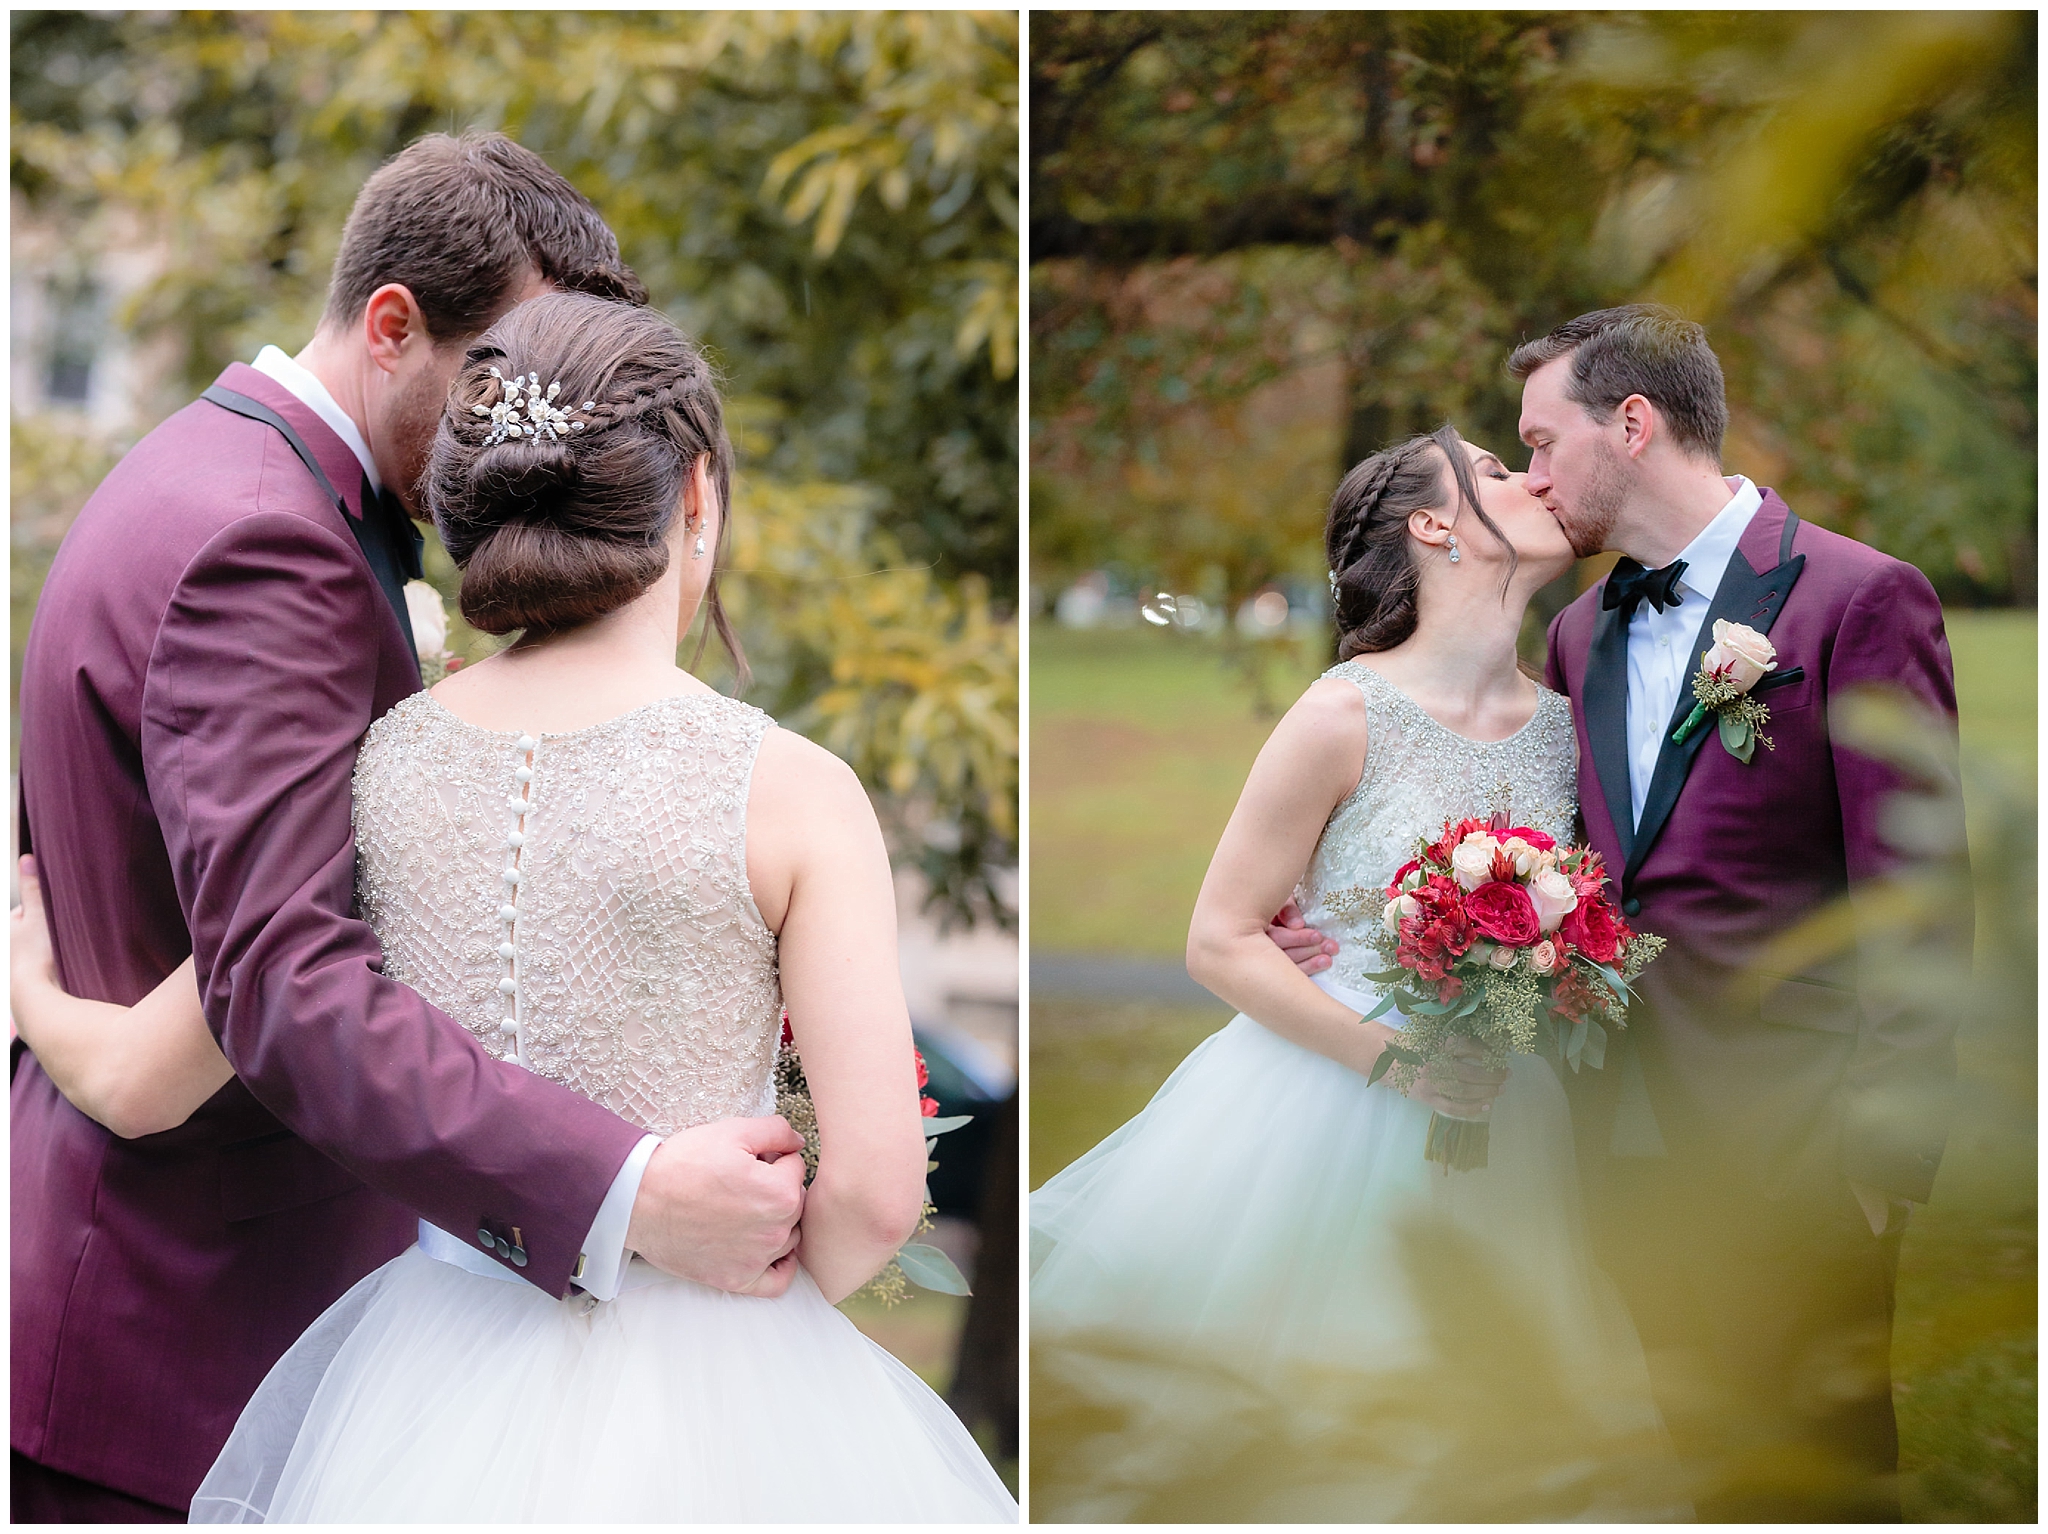 Newlyweds kiss during portraits at Allegheny Commons Park